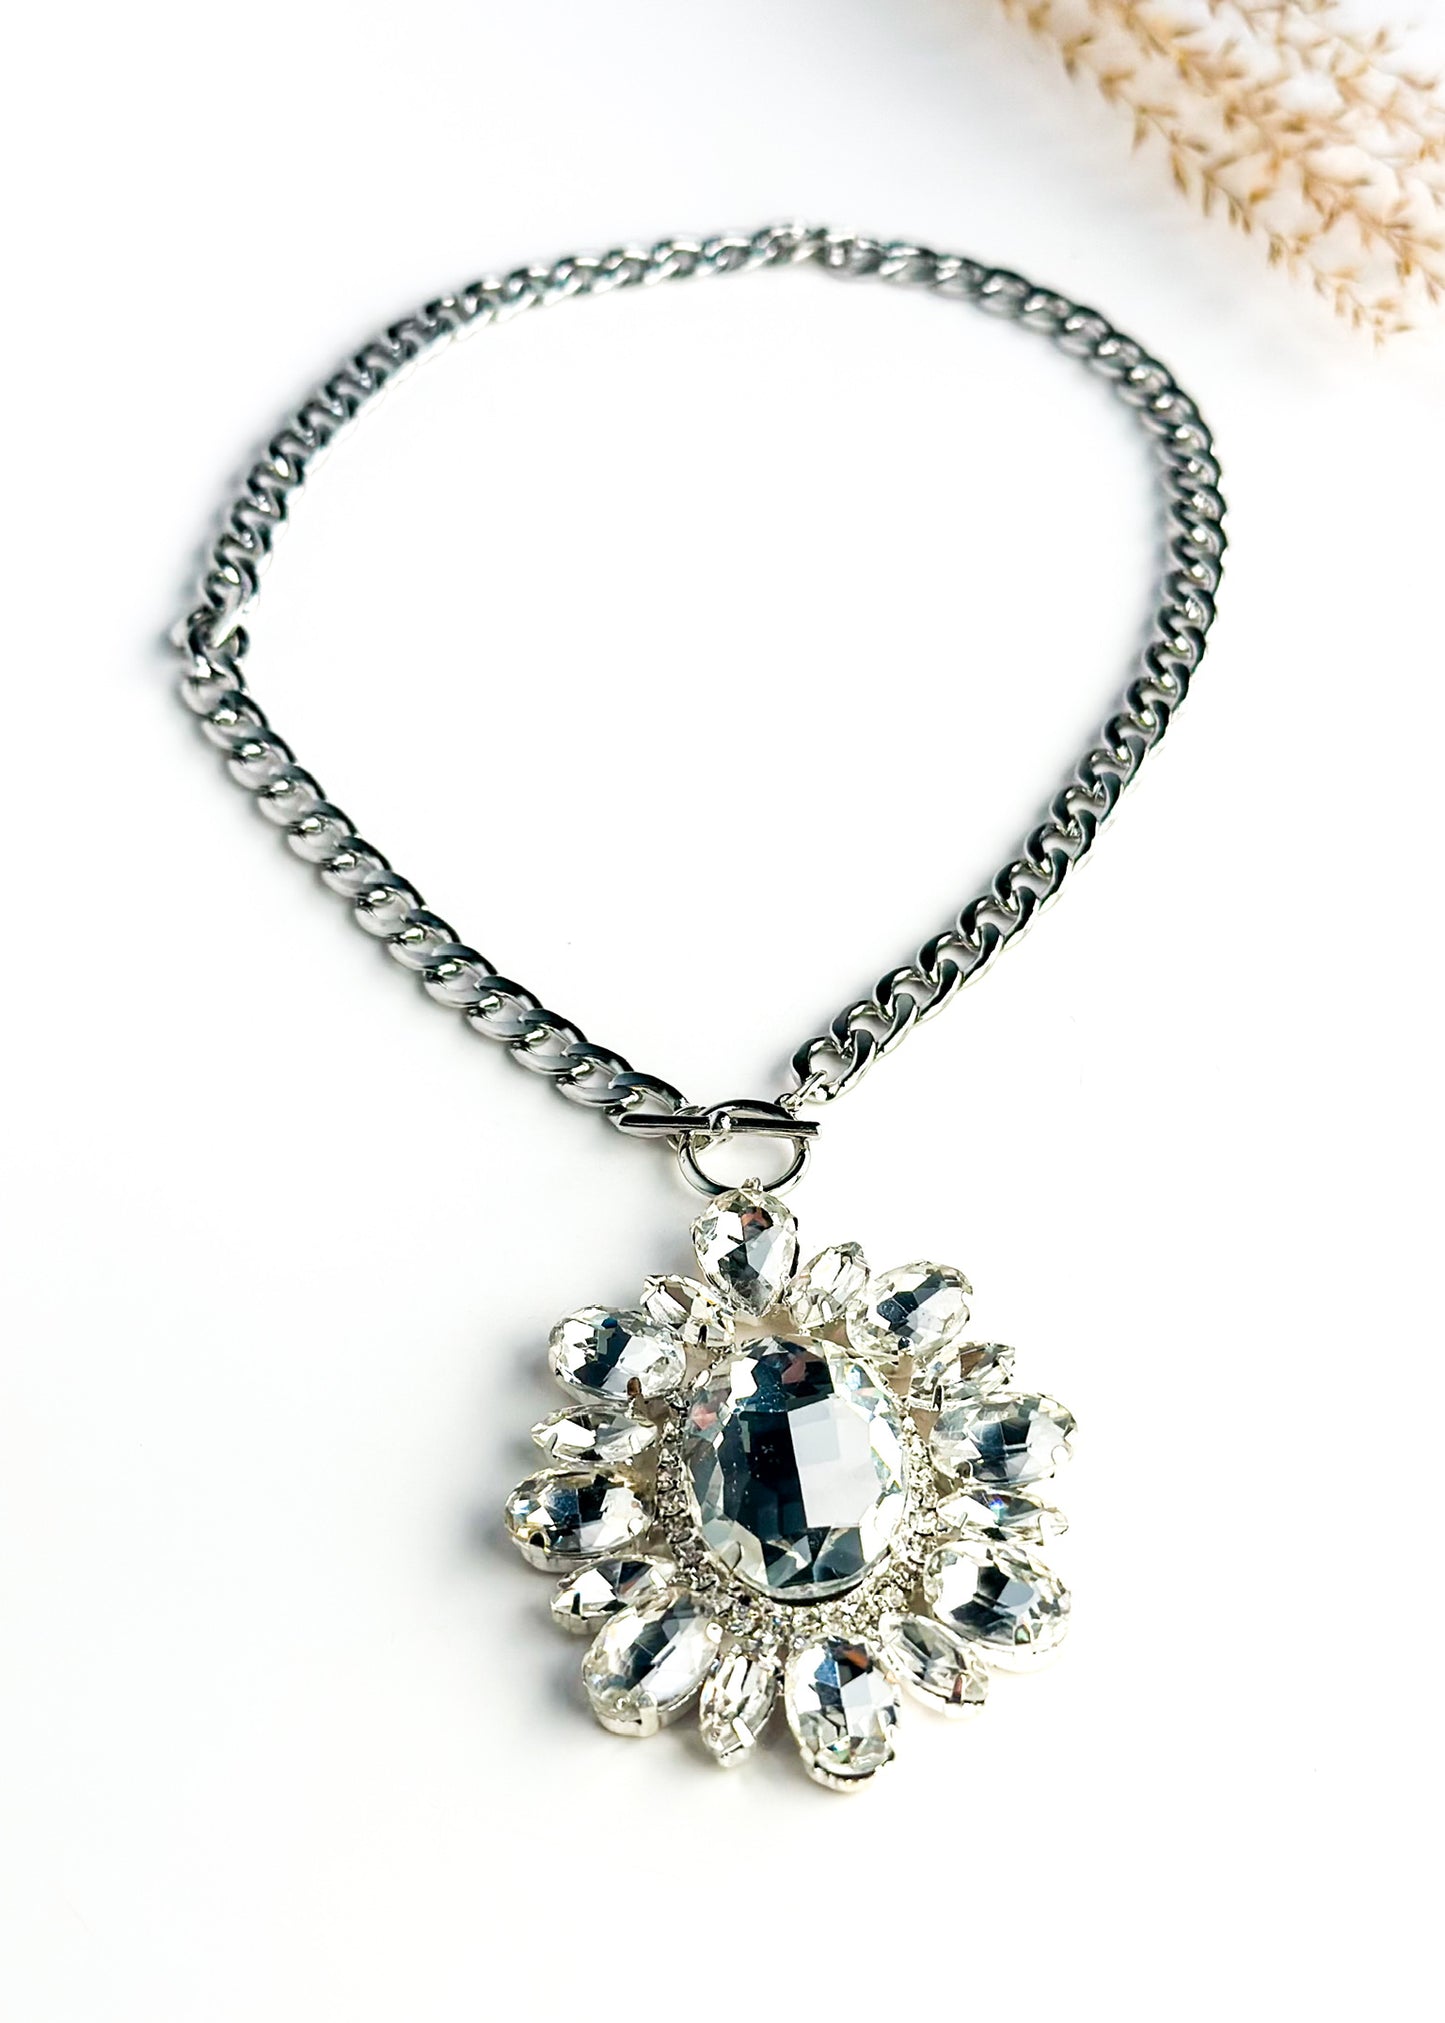 Crystal Clear Silver Statement Necklace